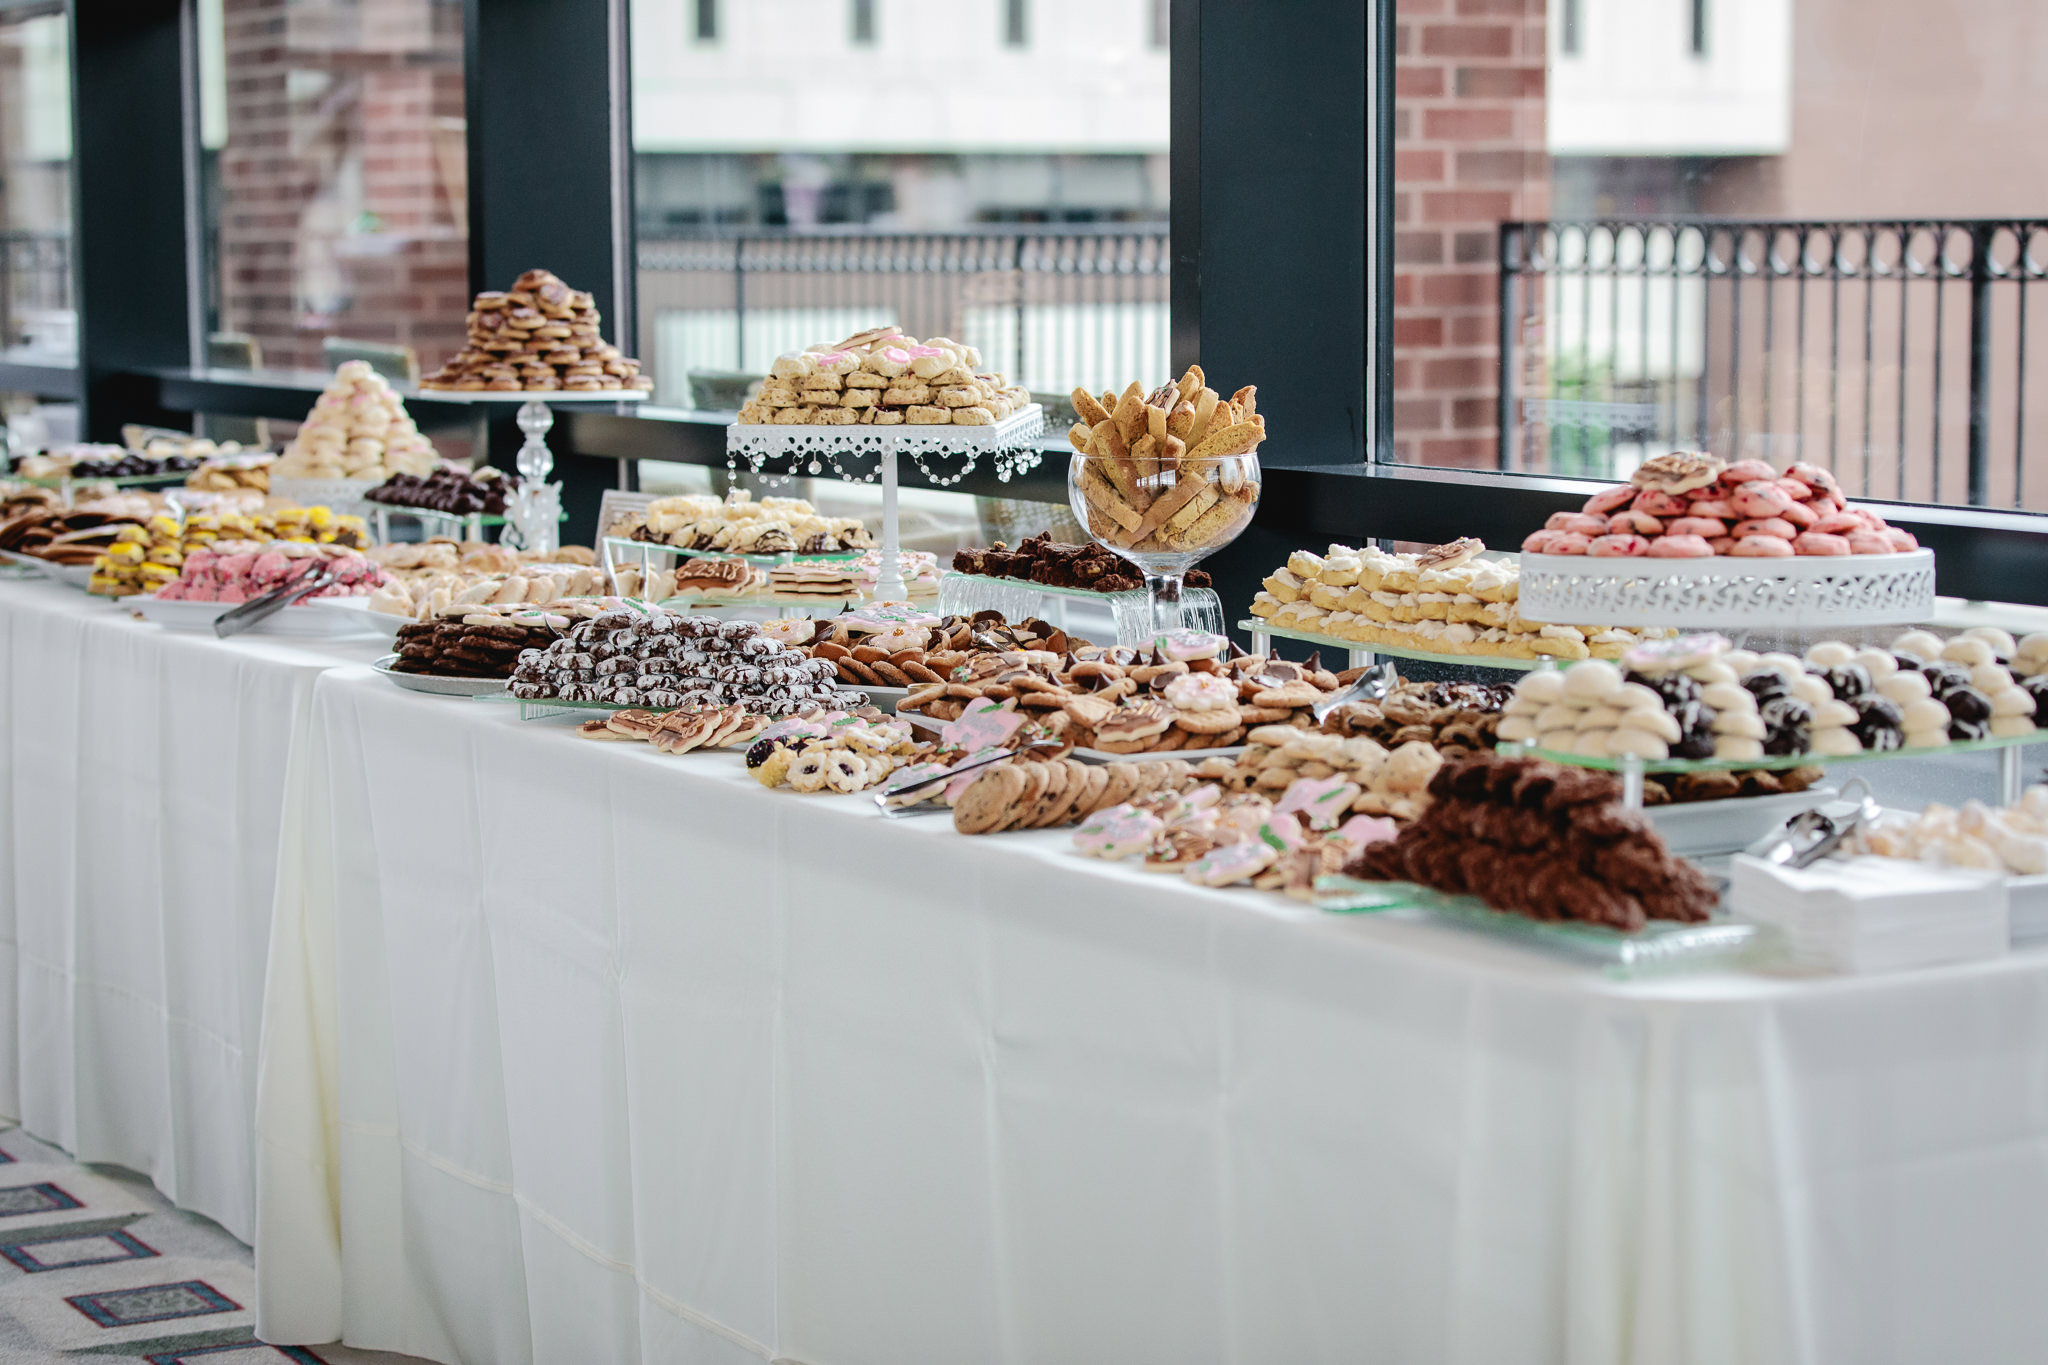 Pittsburgh's cookie table tradition at Duquesne University